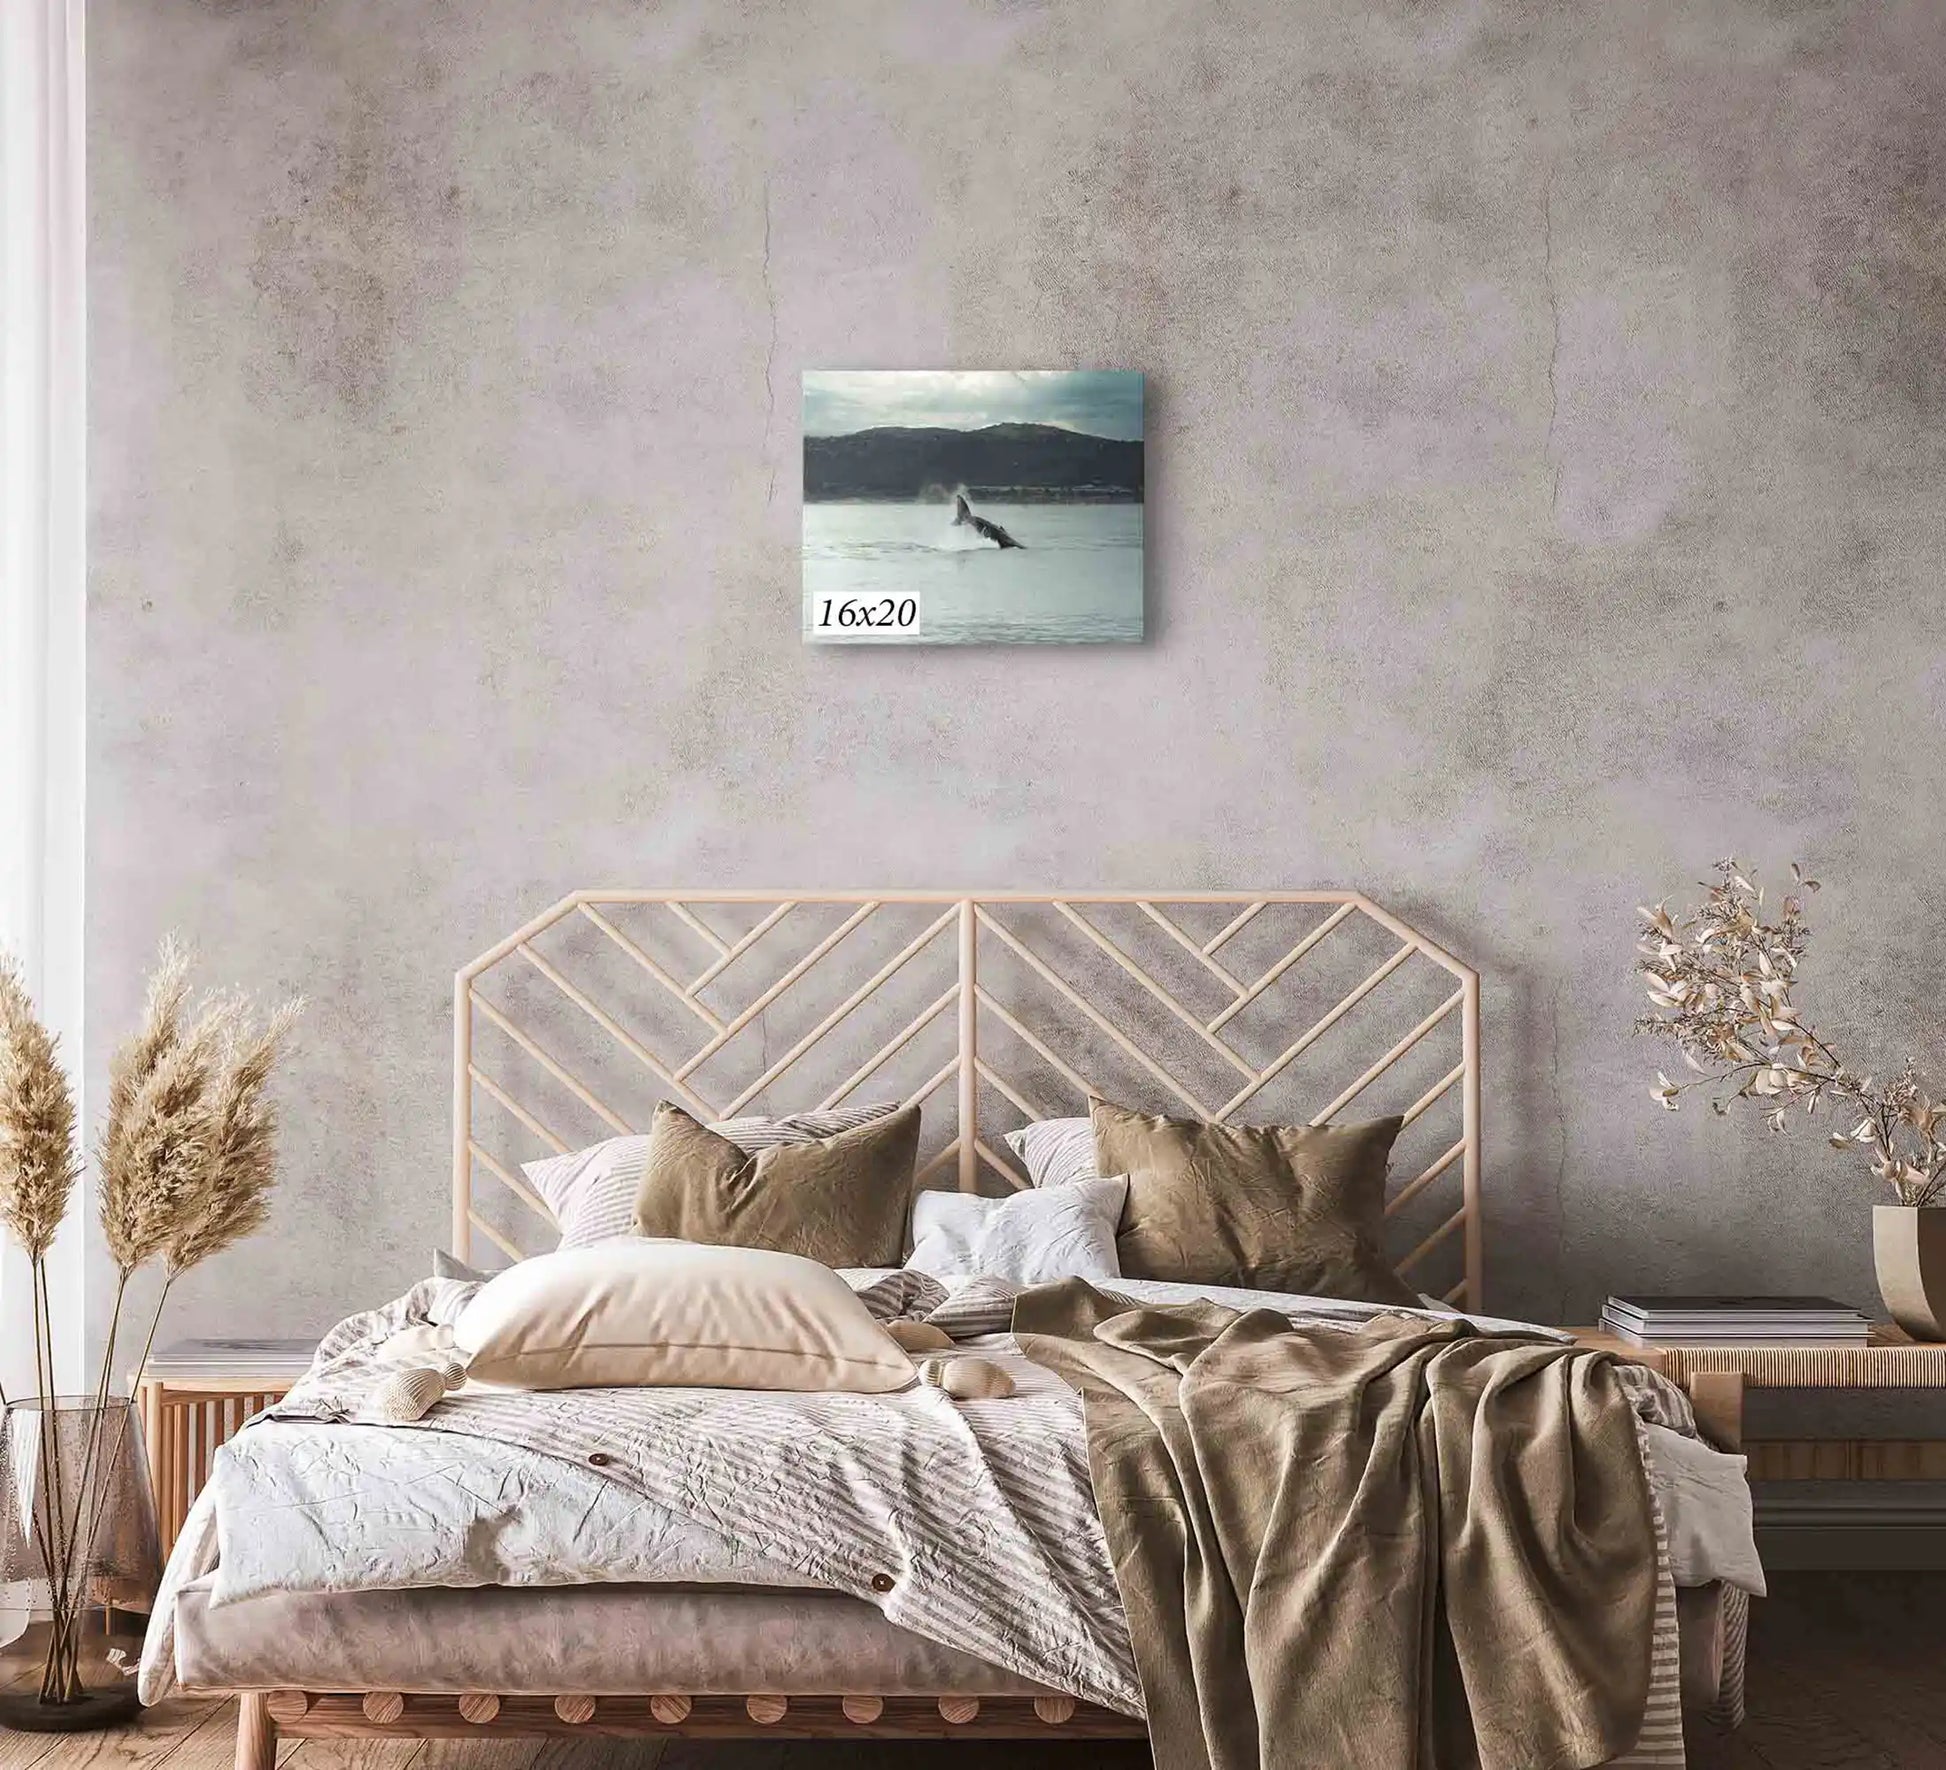 Humpback Whale Fluke as canvas wall decor 16x20-inch in bedroom